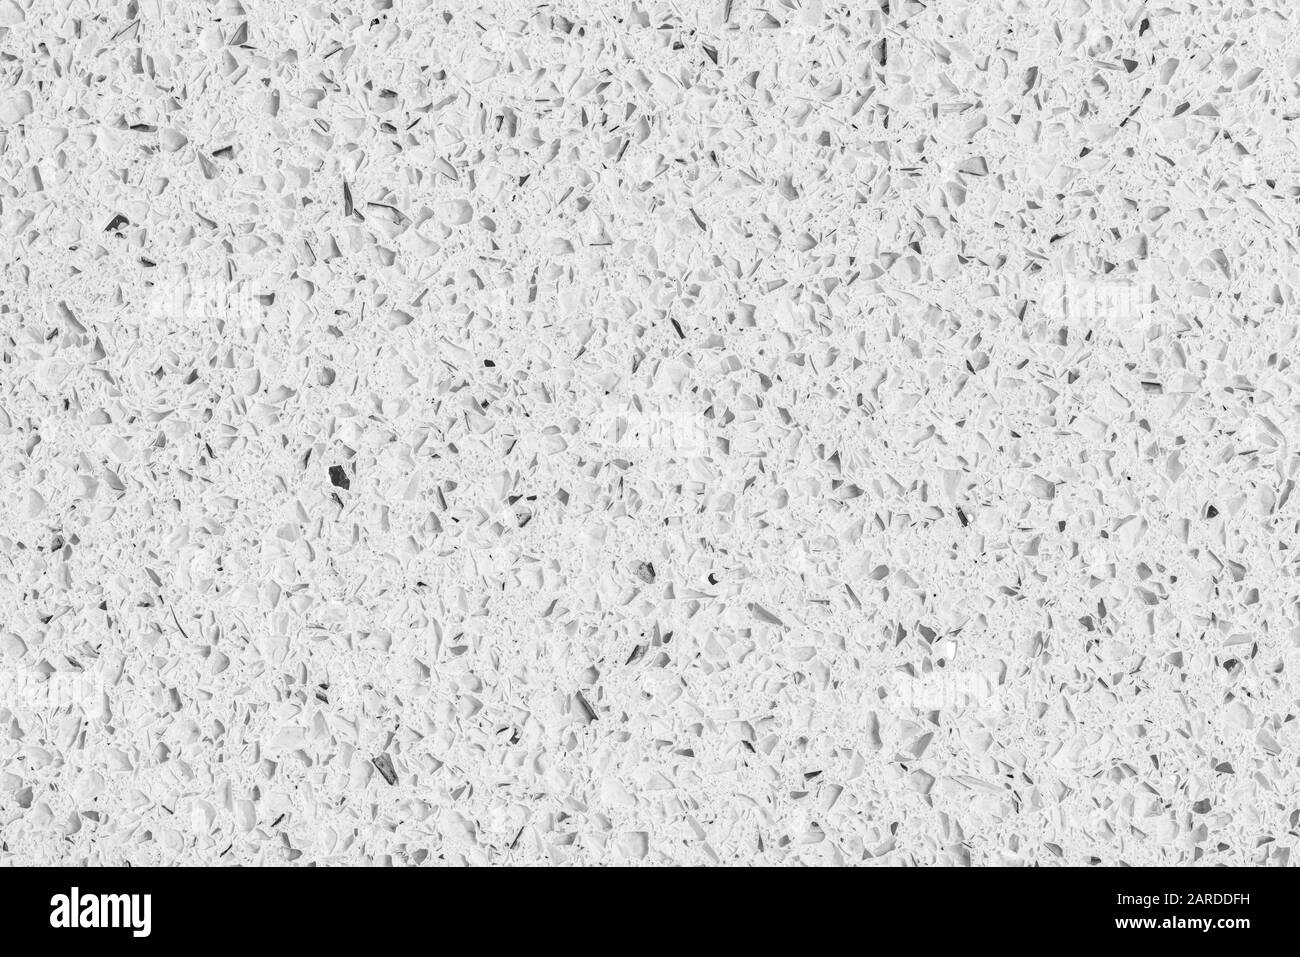 Quartz surface white for bathroom or kitchen countertop. High resolution texture and pattern. Stock Photo